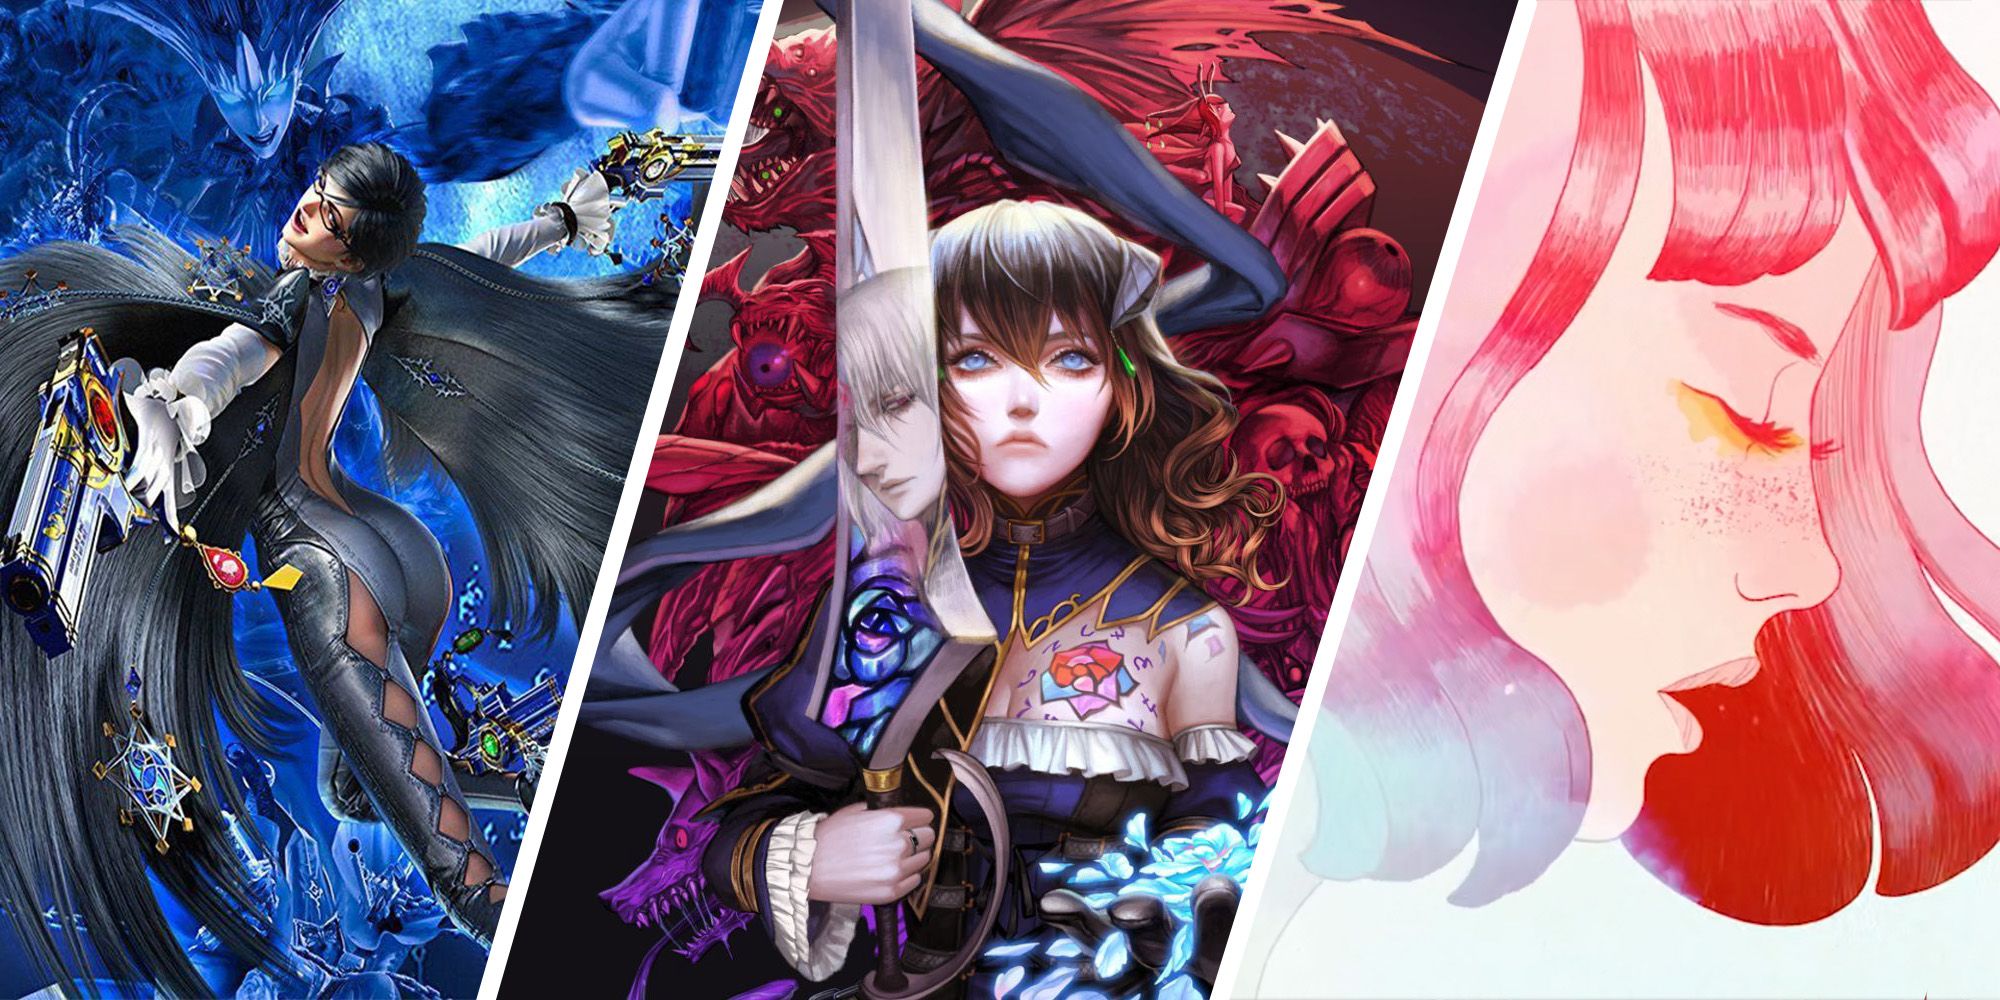 Rarest Nintendo Switch Games - Split Image Of Bayonetta, Bloodstained Ritual Of The Night, And Gris